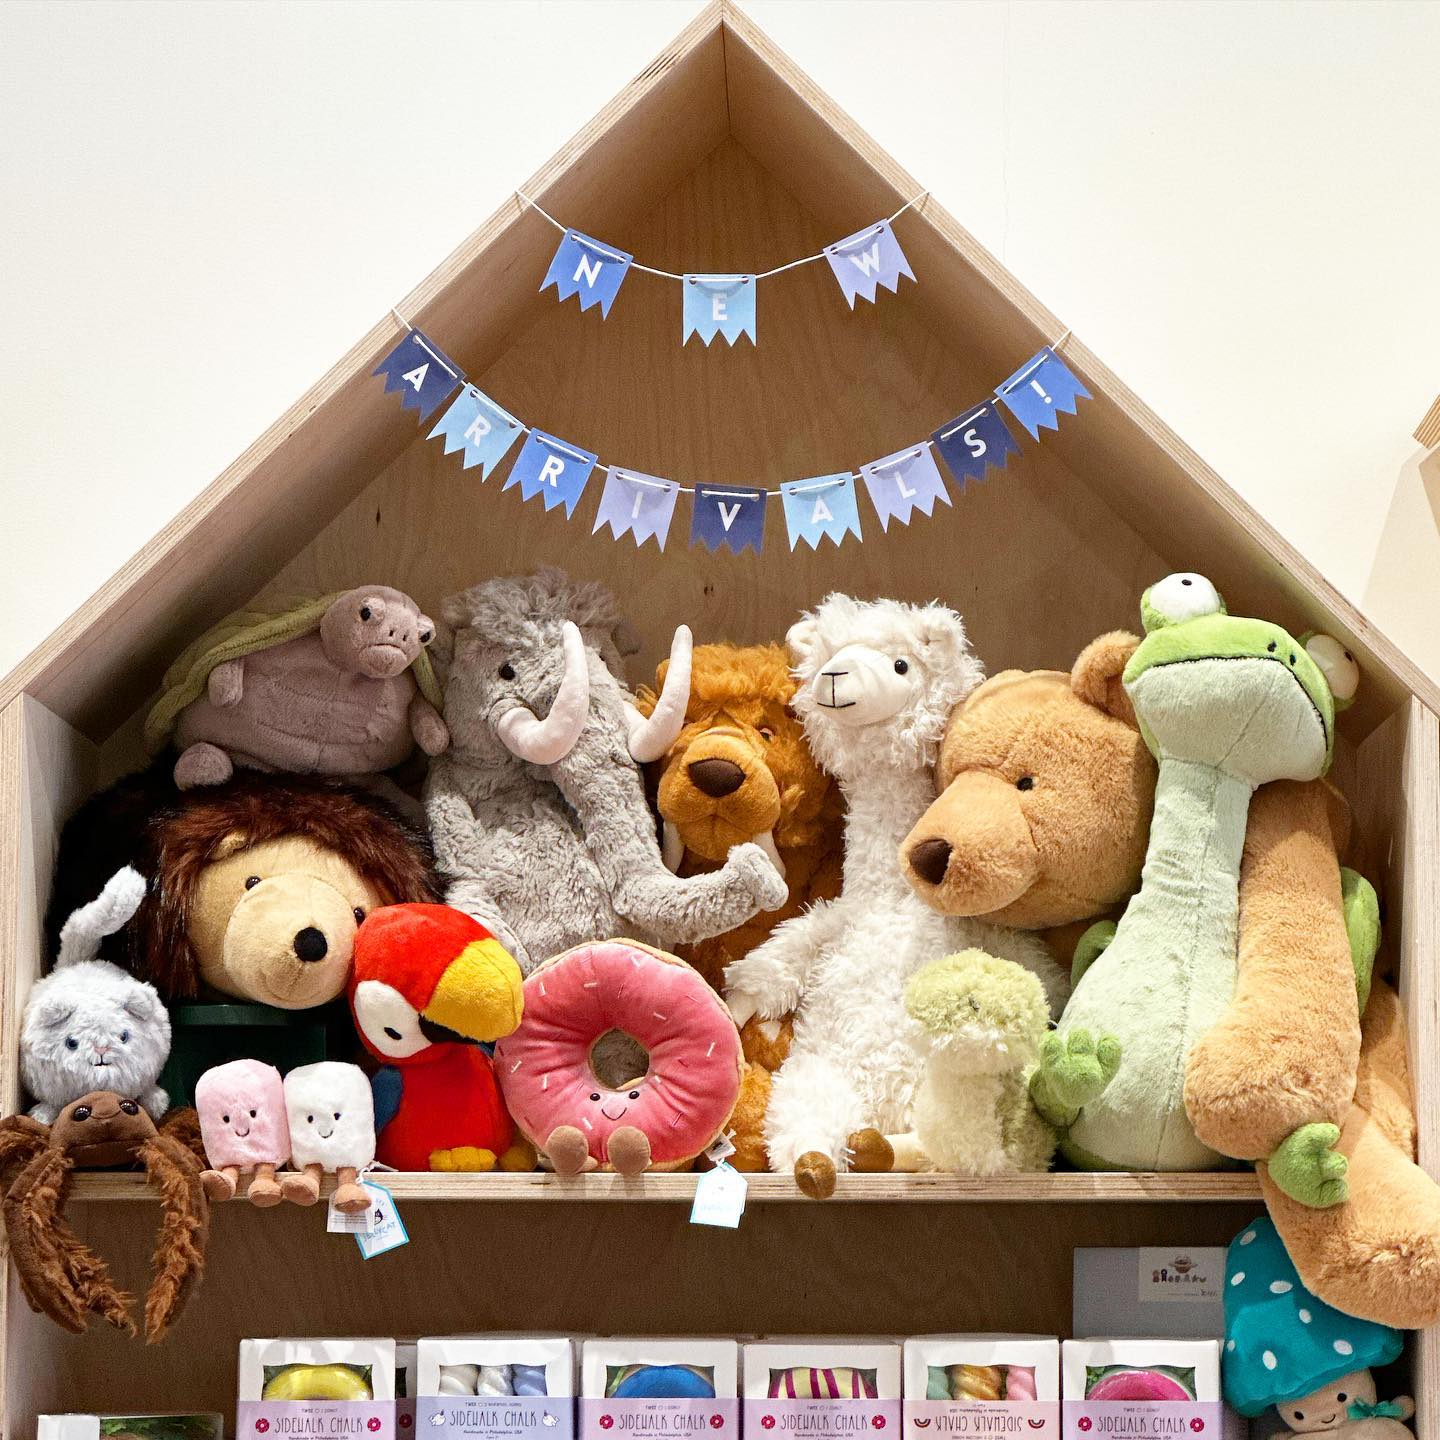 A display of various stuffed animals arranged on shelves inside a wooden house-shaped structure with a banner above reading "new arrivals".